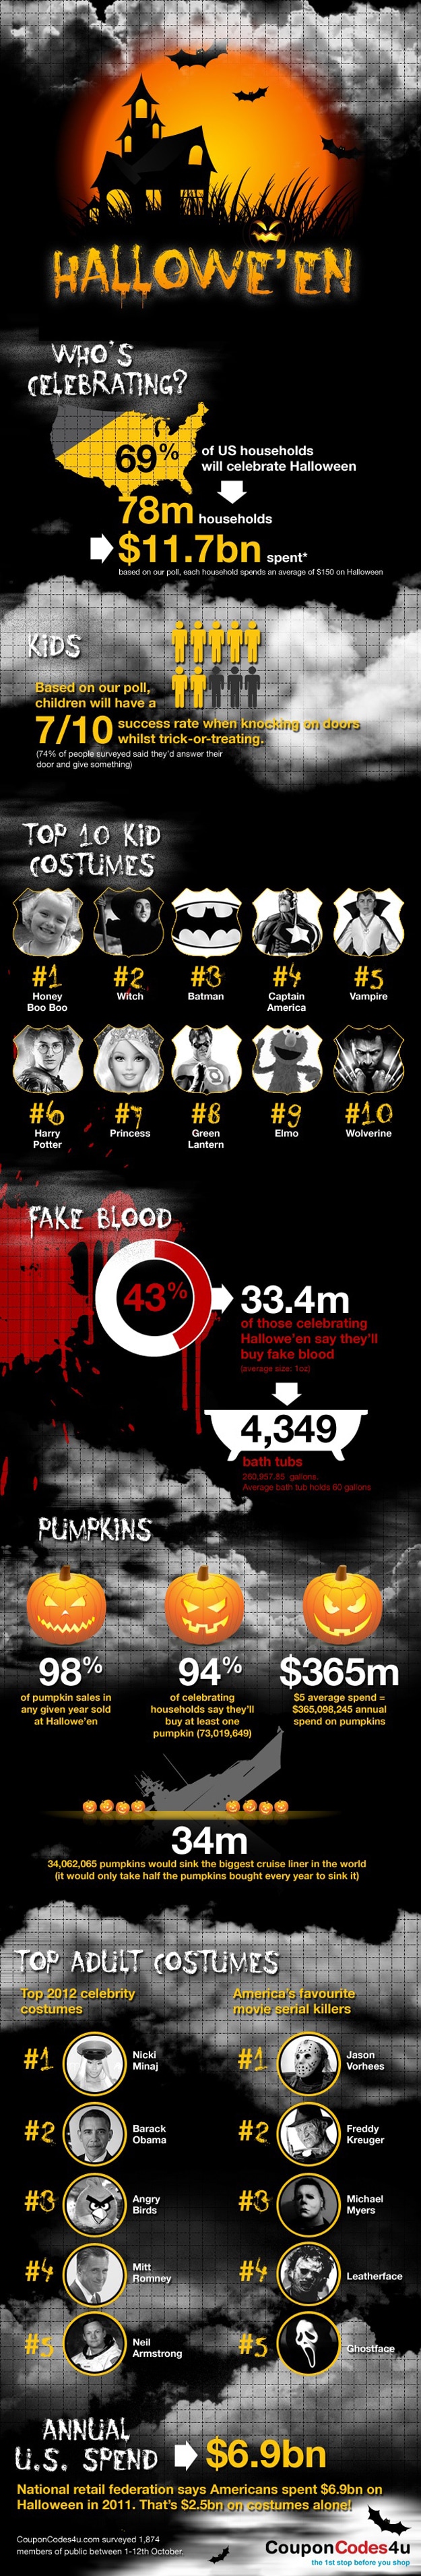 2012: Some Of The Most Popular Halloween Costumes [Infographic]